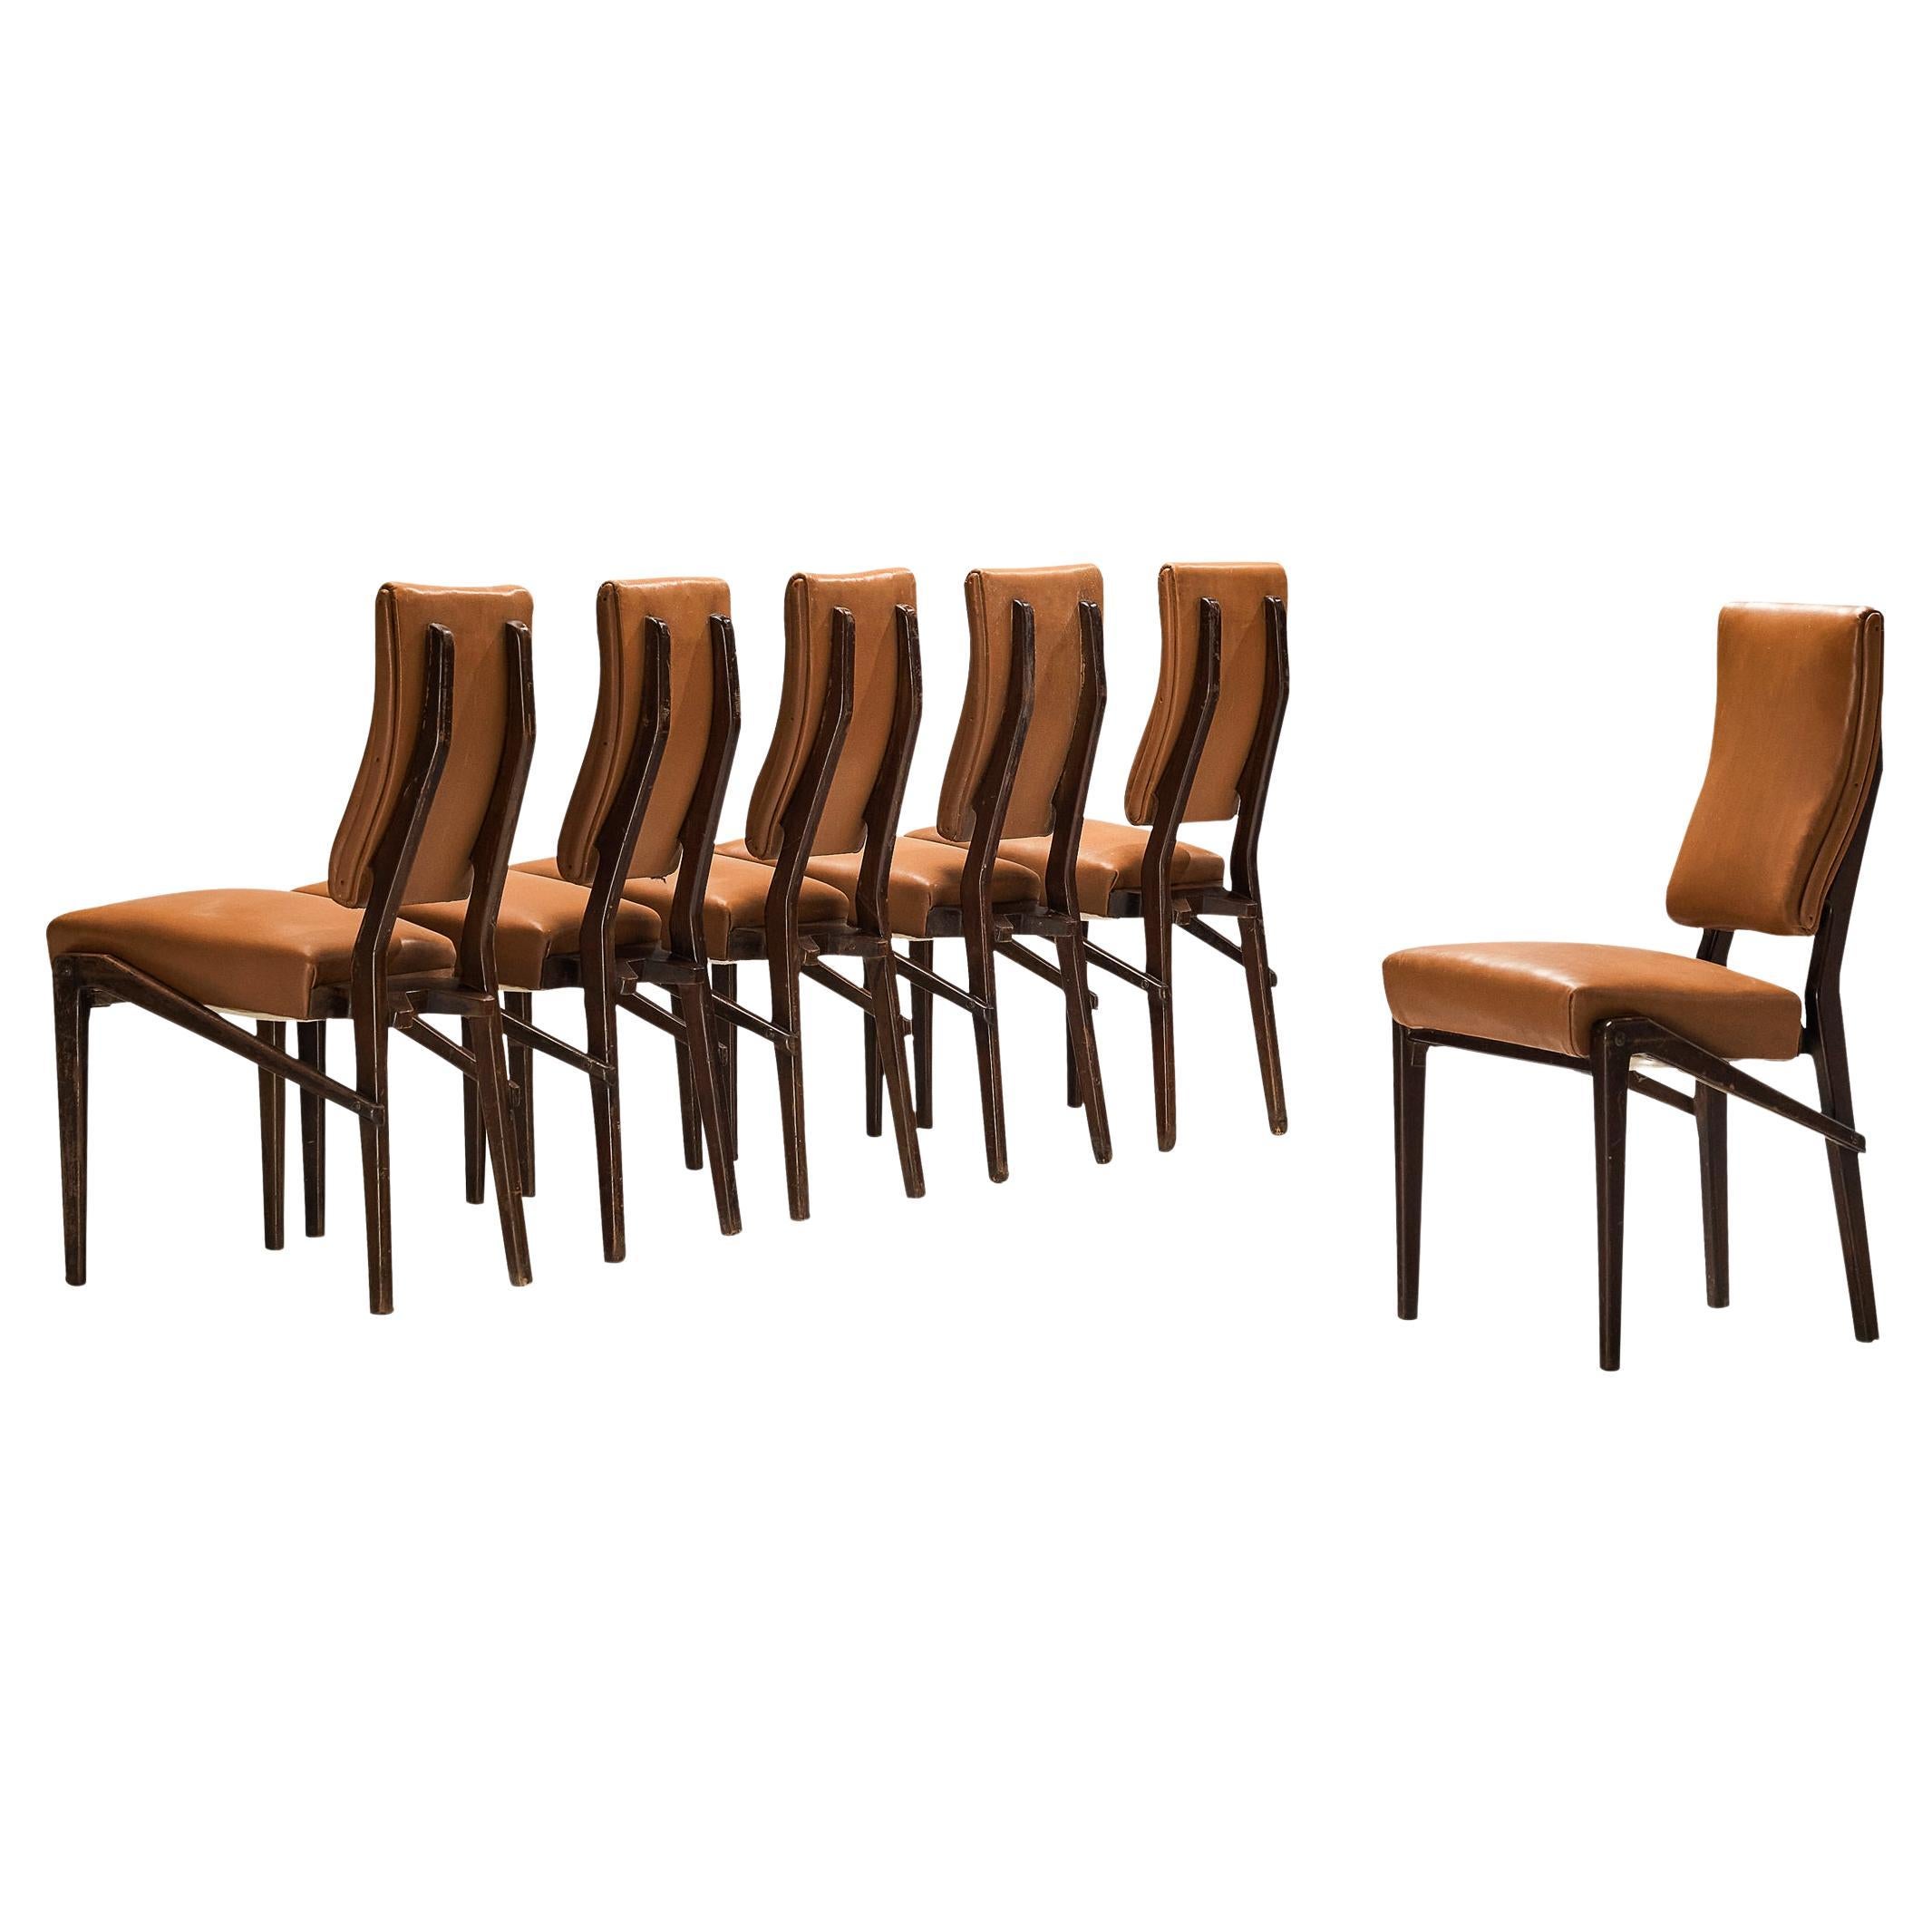 Unique Mario Oreglia Set of Six Dining Chairs with Sculptural Wooden Frame  For Sale